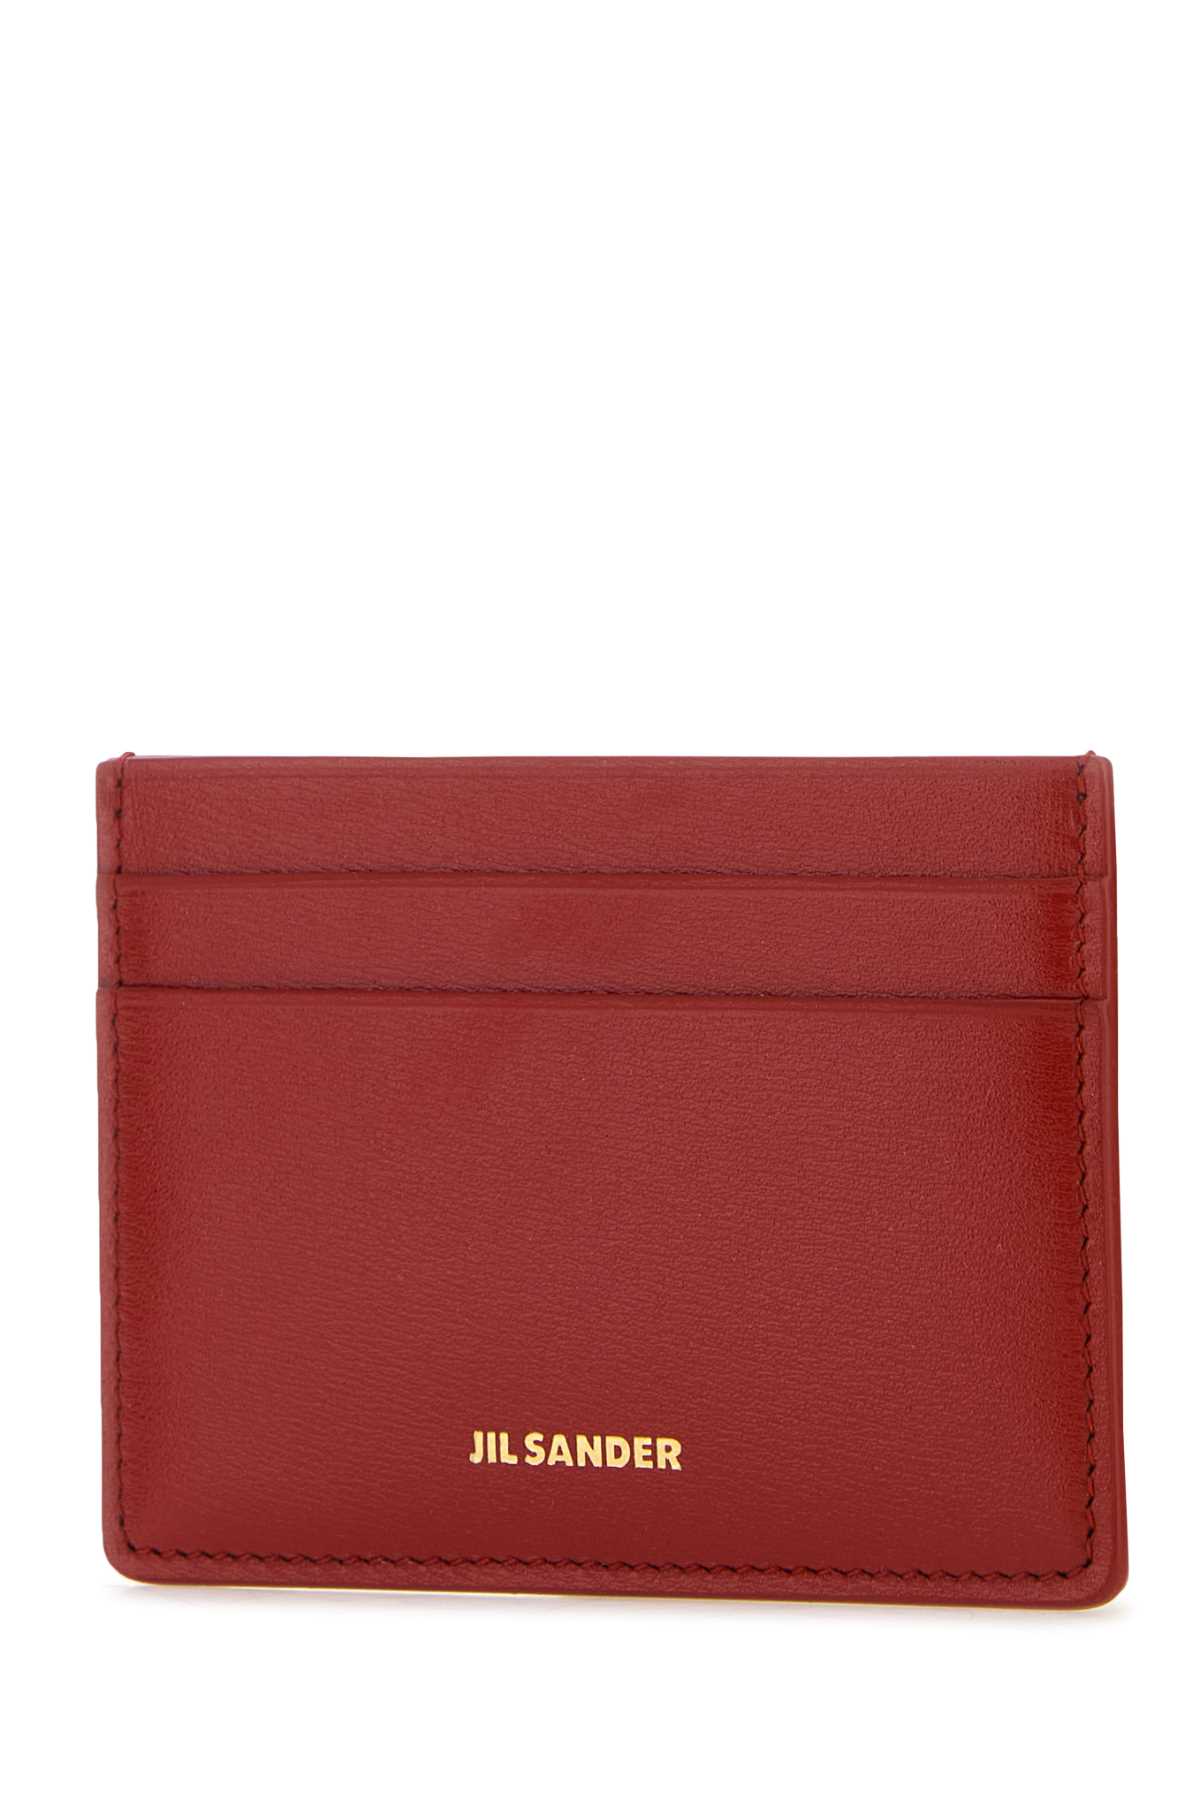 Jil Sander Tiziano Red Leather Card Holder In 613